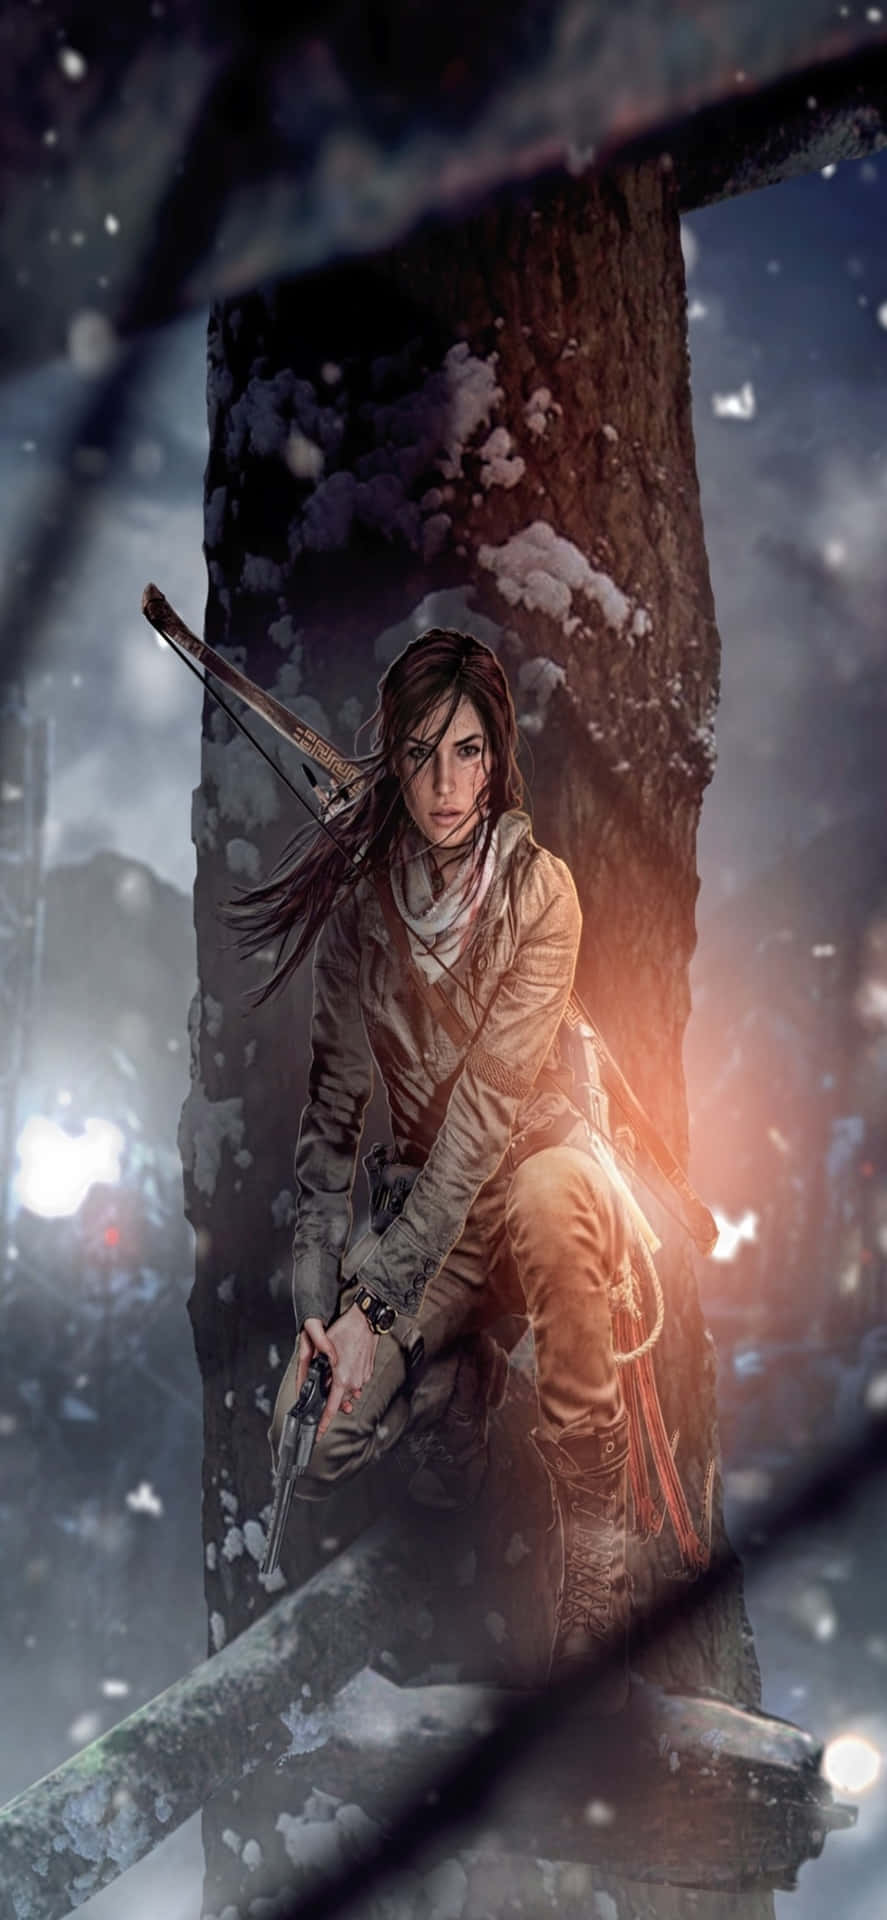 Iphone X Rise Of The Tomb Raider Background 1125 X 2436 Background